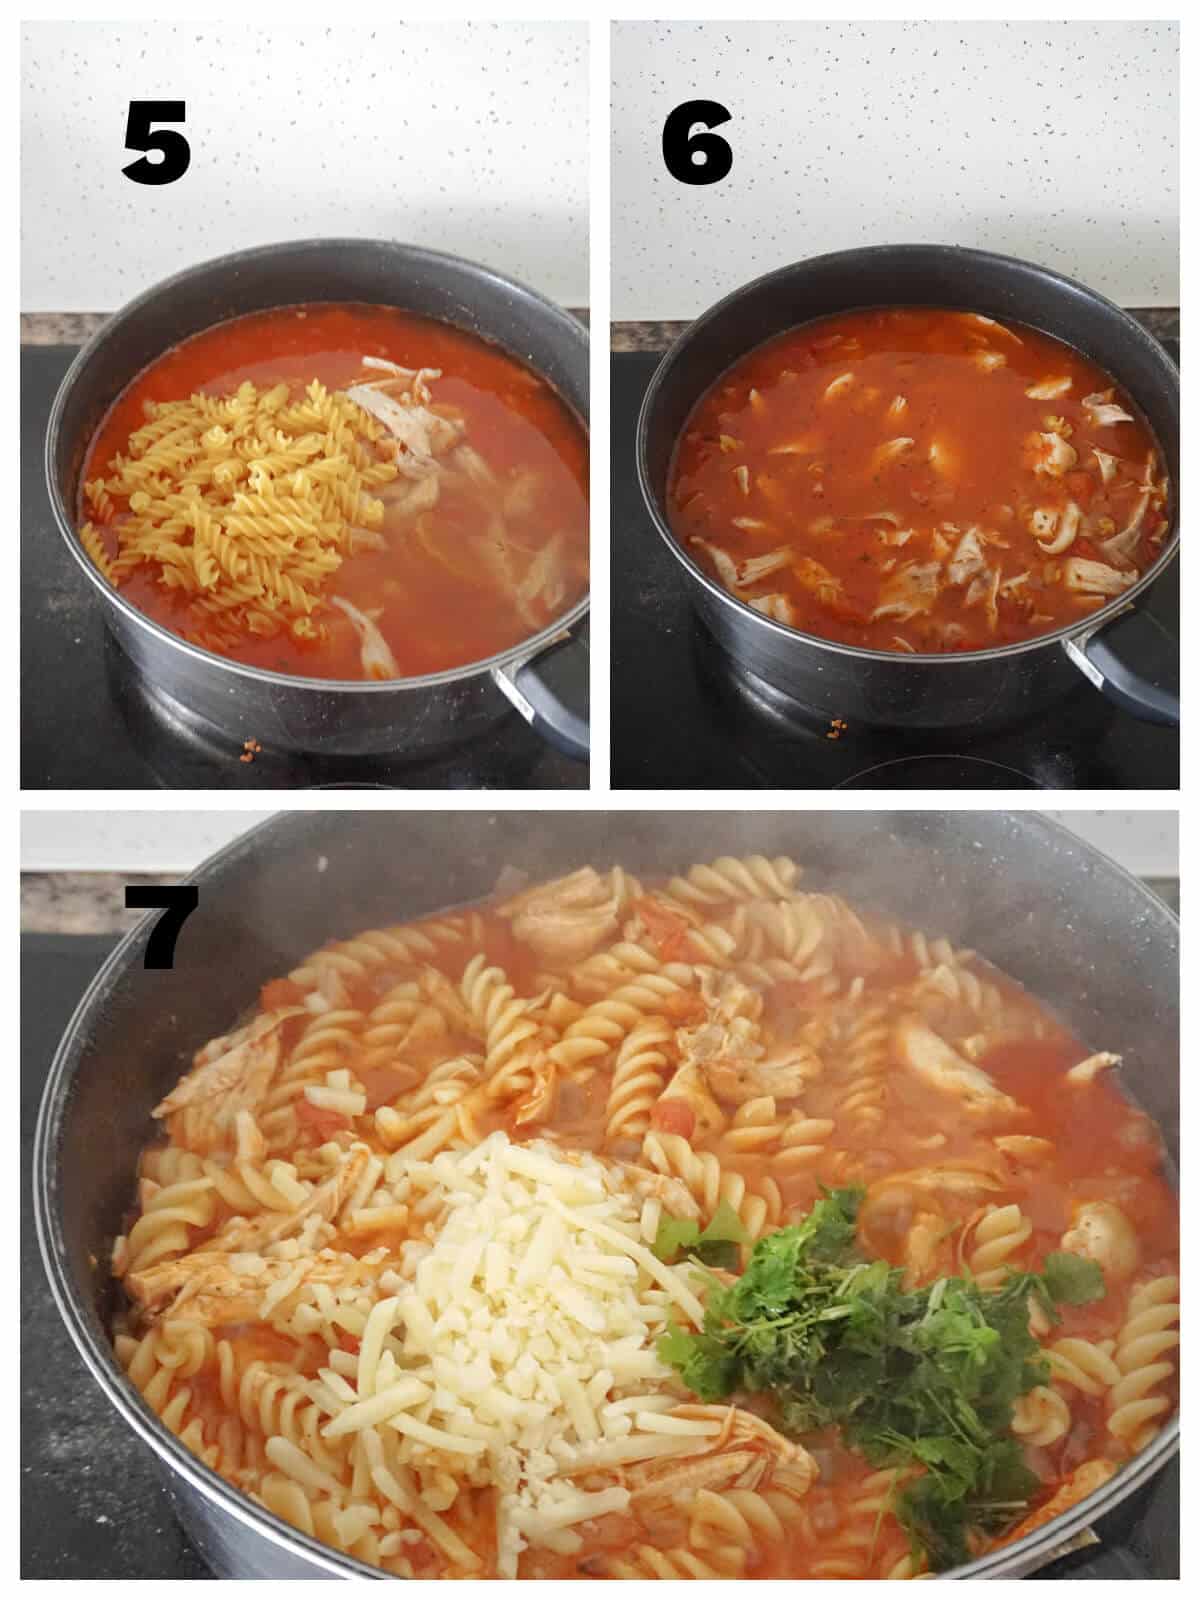 Collage of 3 photos to show how to make chicken pasta